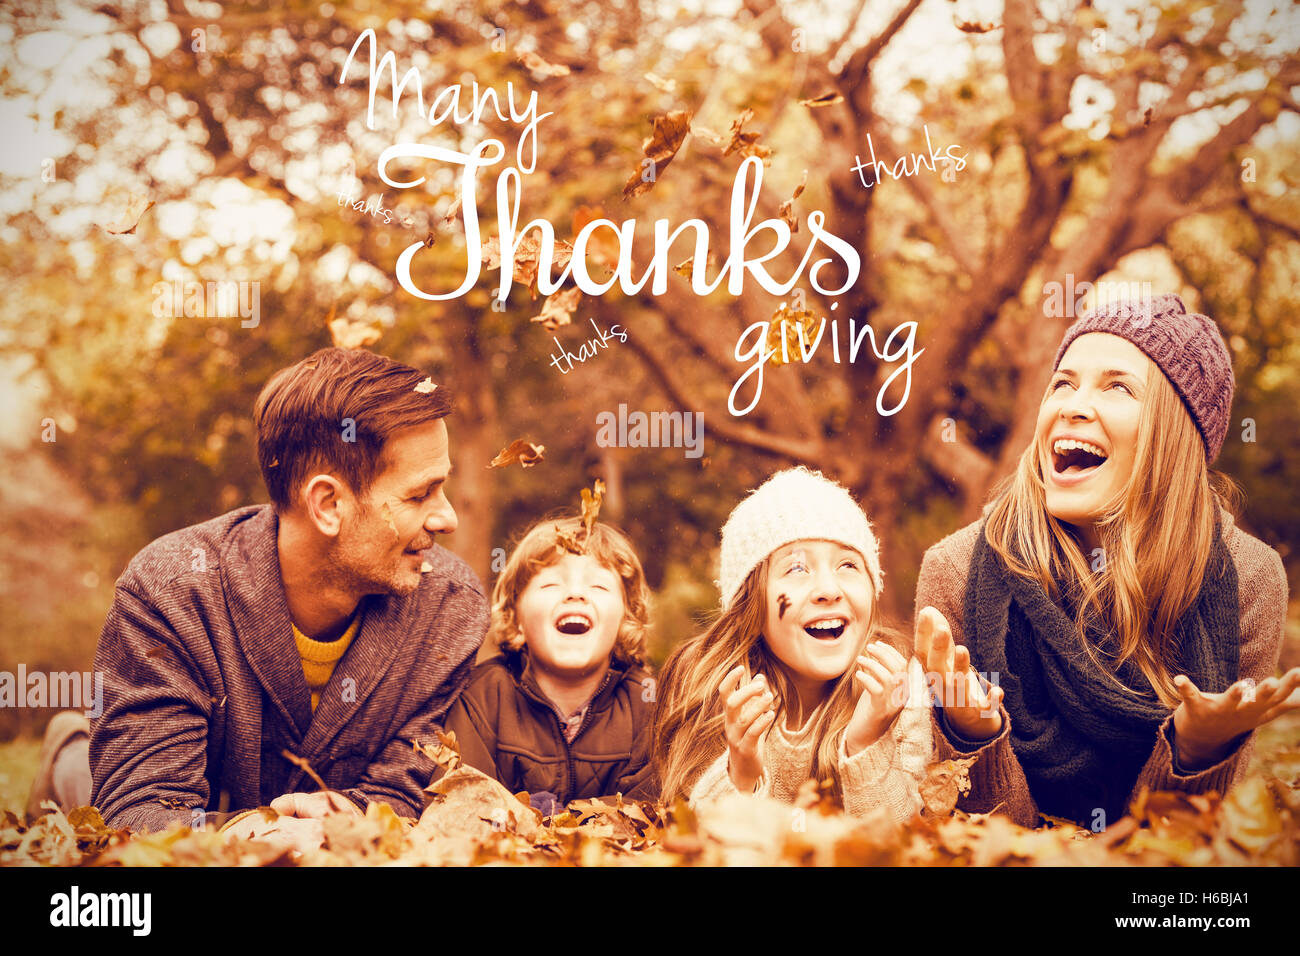 Composite image of happy thanksgiving day message Stock Photo